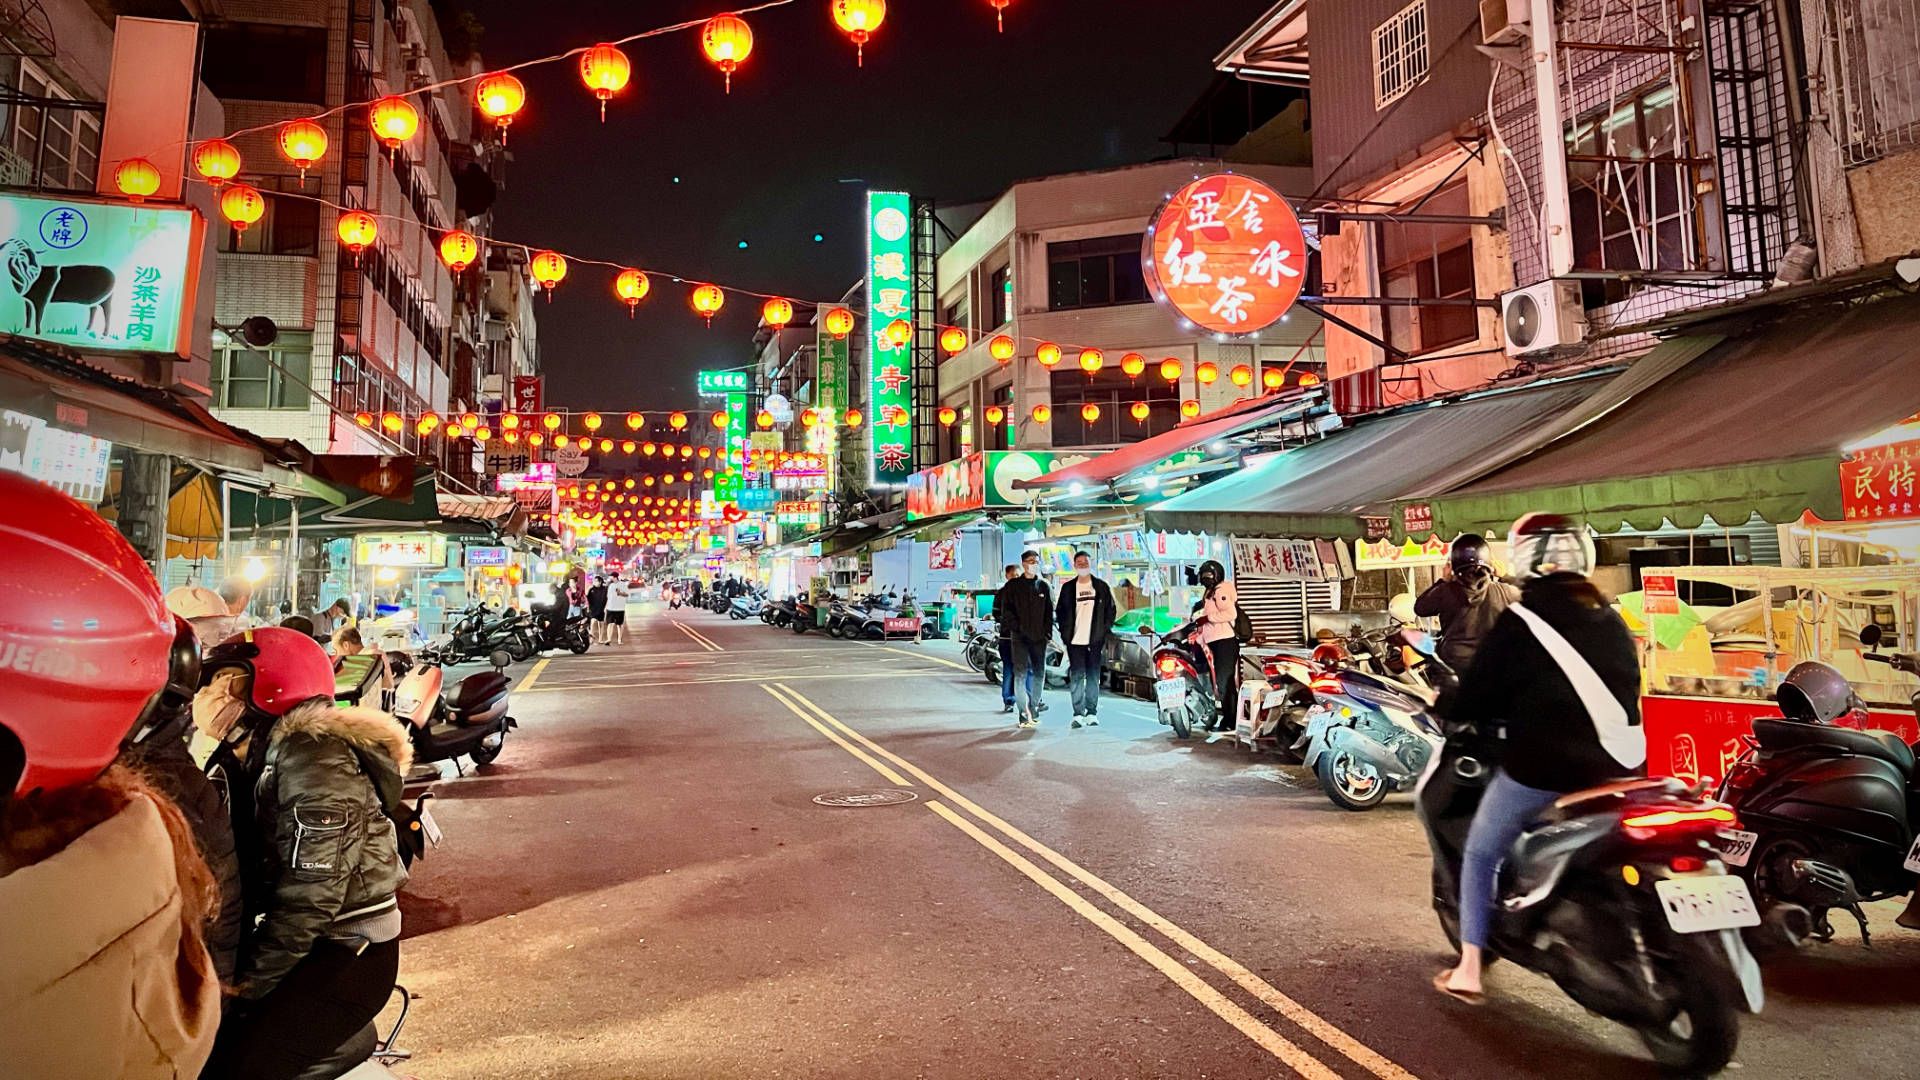 A wide-angle shot of the night market on Fuxing 2nd Road. People are walking or riding scooters along the street, and red lanterns hang overheat.